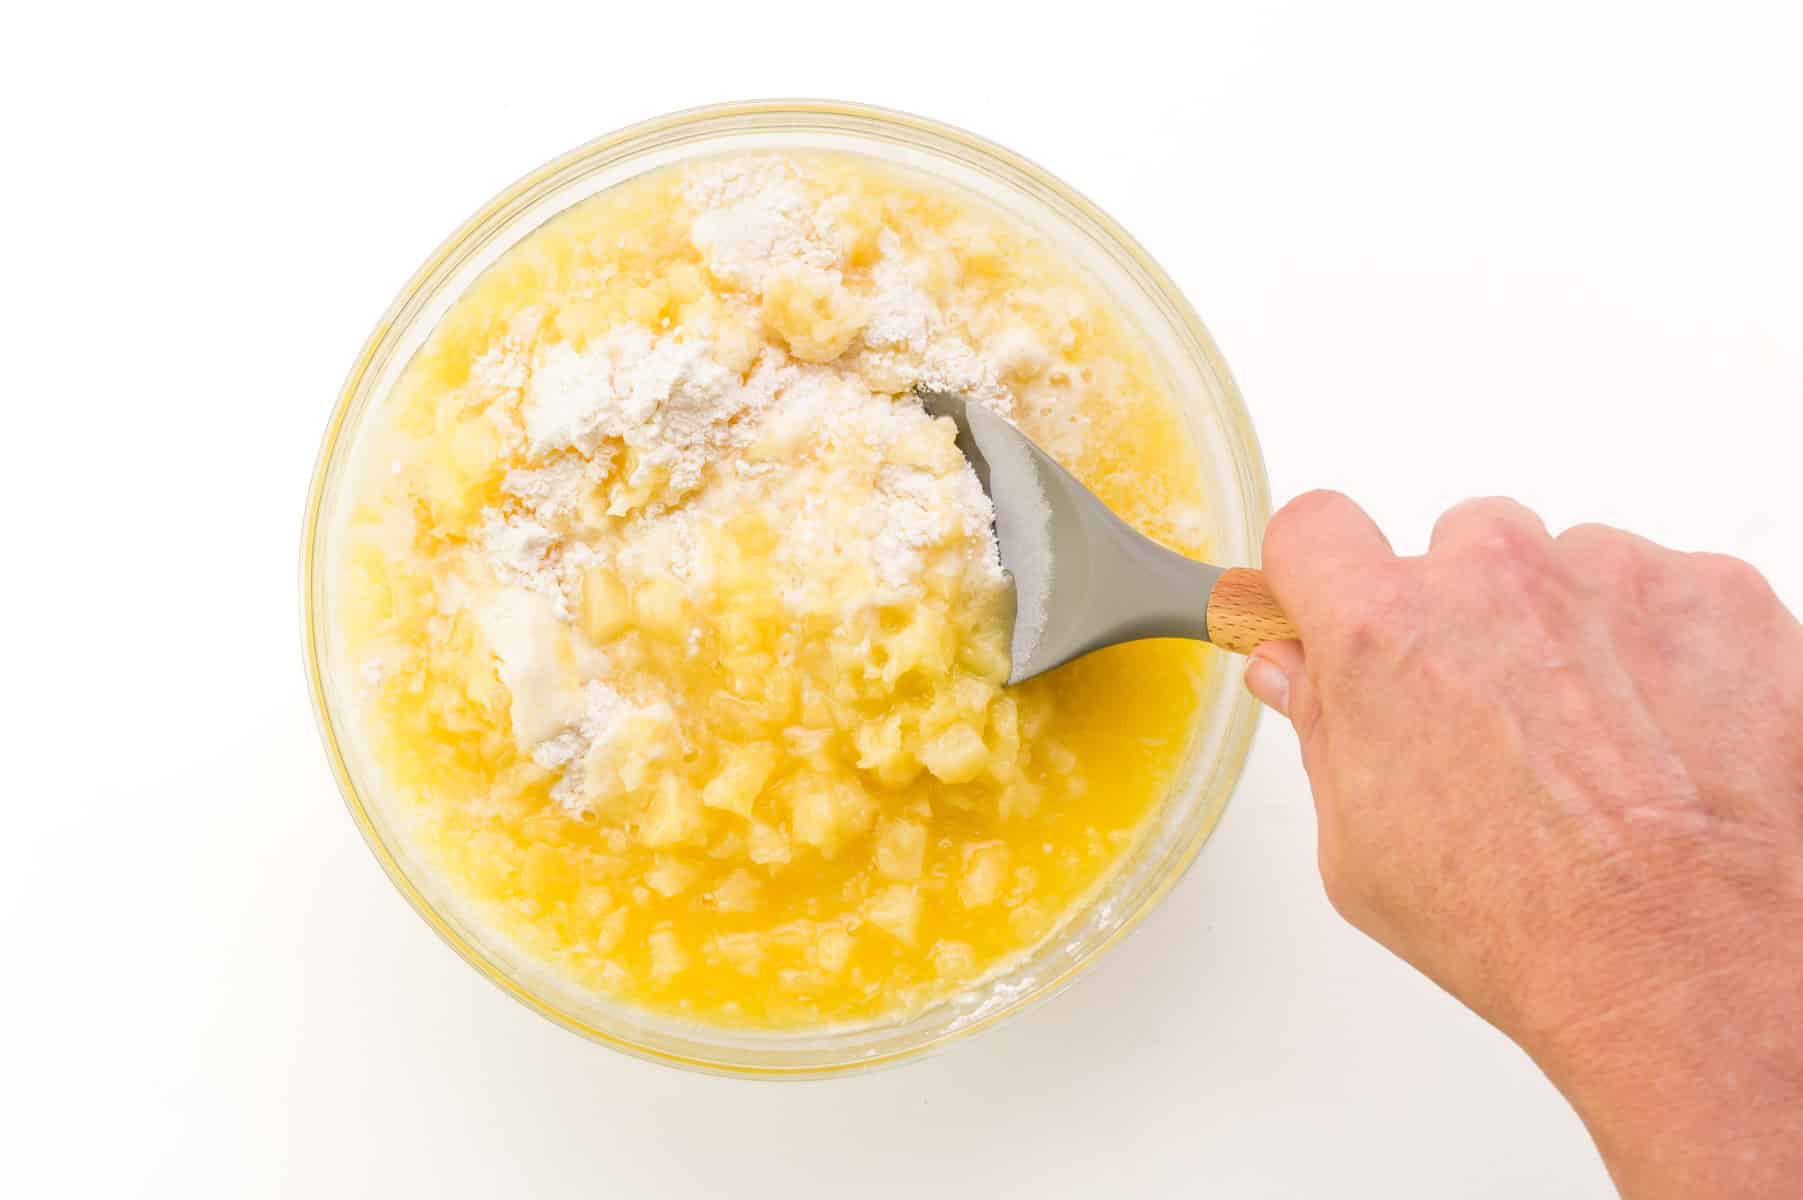 A hand holds a spatula, using it to stir together cake batter with crushed pineapple.